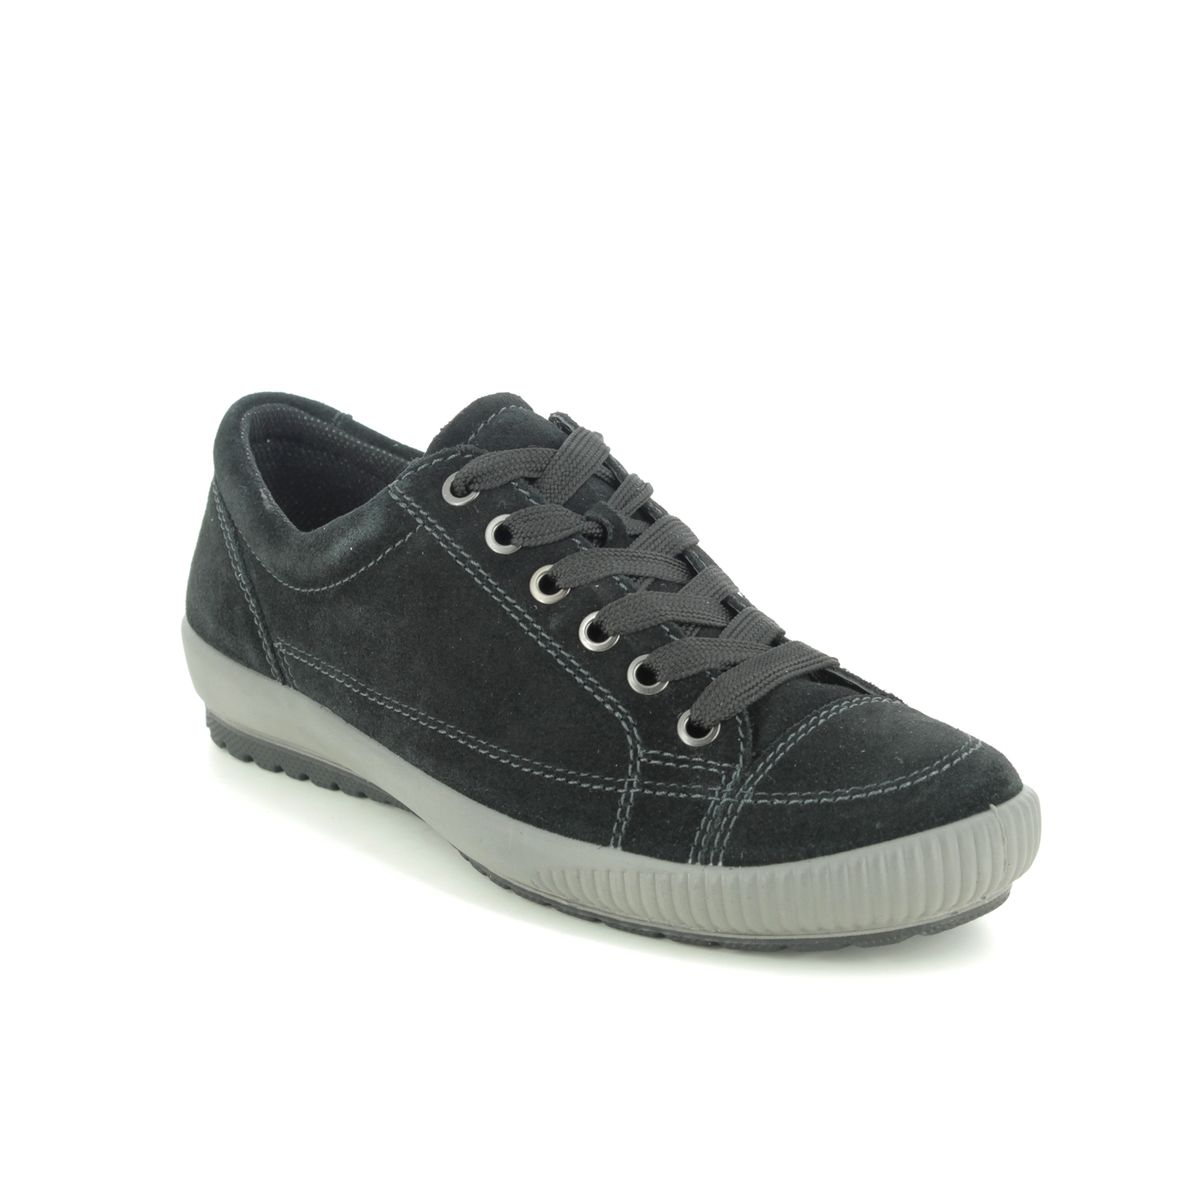 Legero Tanaro Stitch Black Suede Womens Lacing Shoes 0800820-0000 In Size 9 In Plain Black Suede